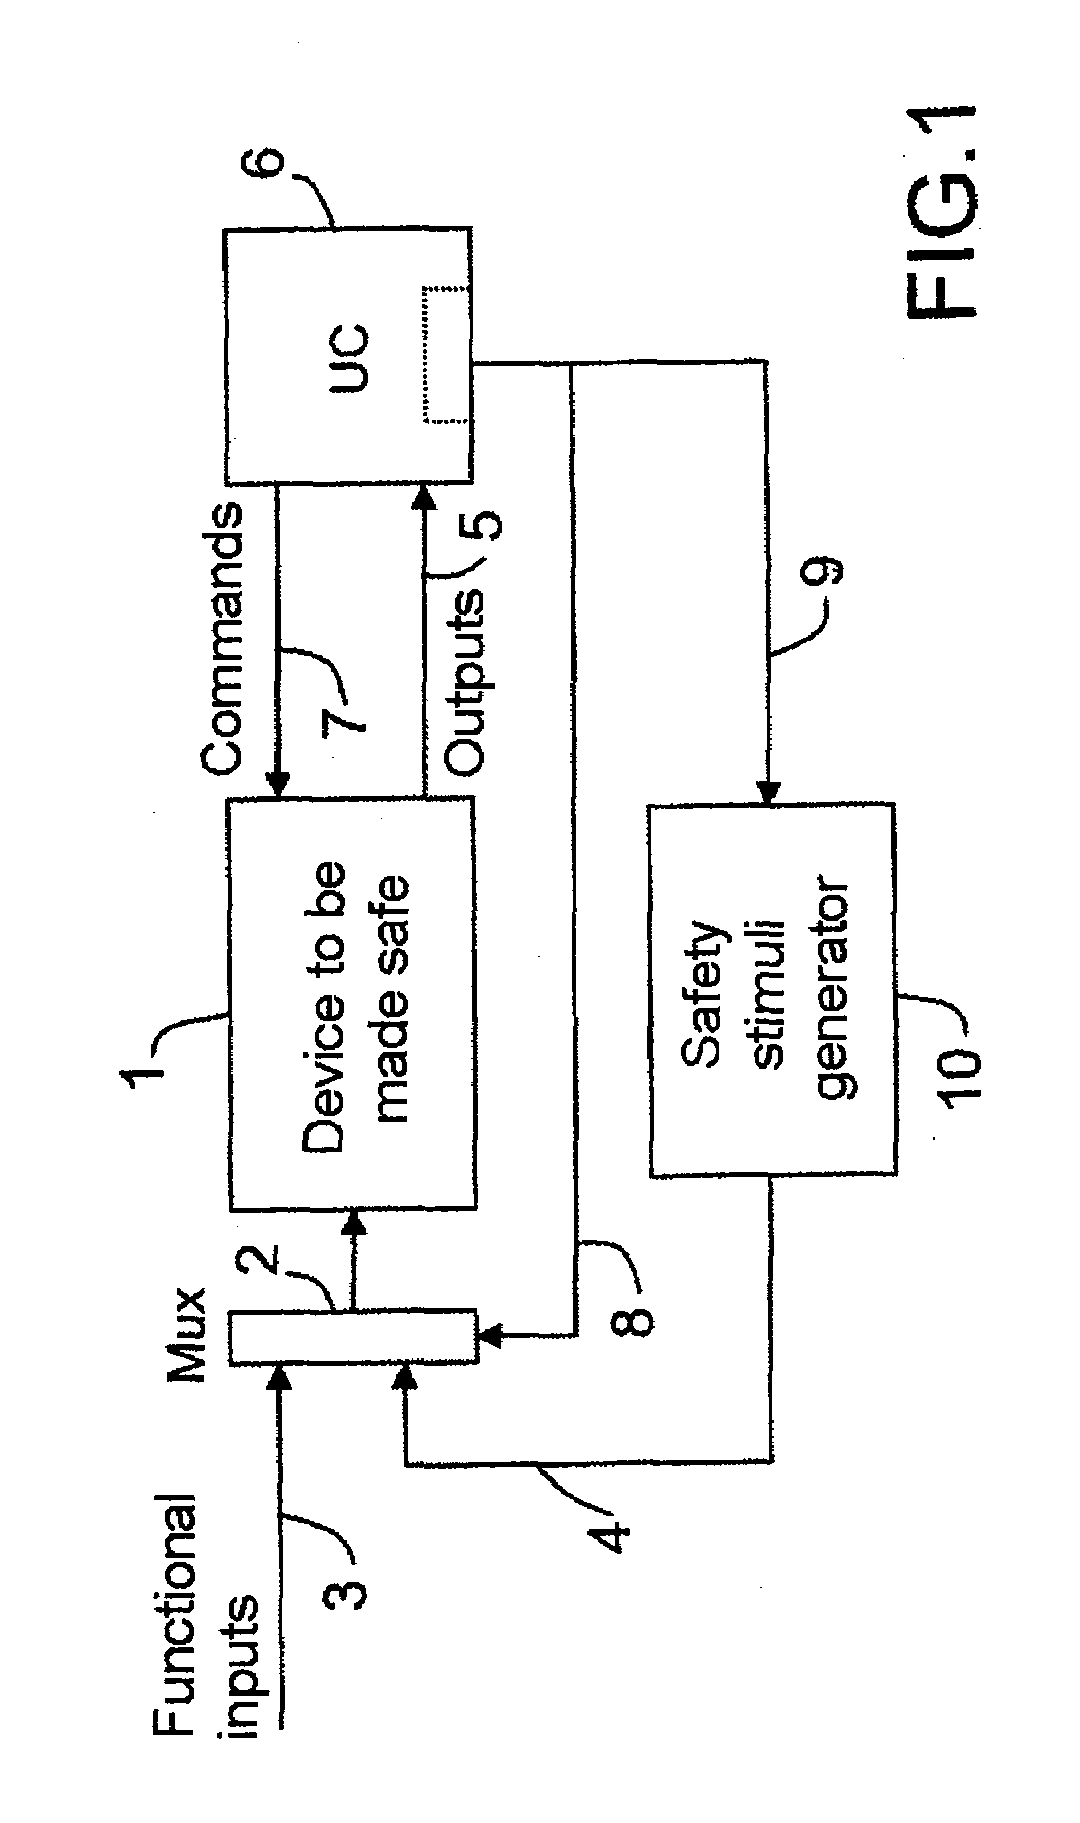 Method of improving the integrity and safety of an avionics system